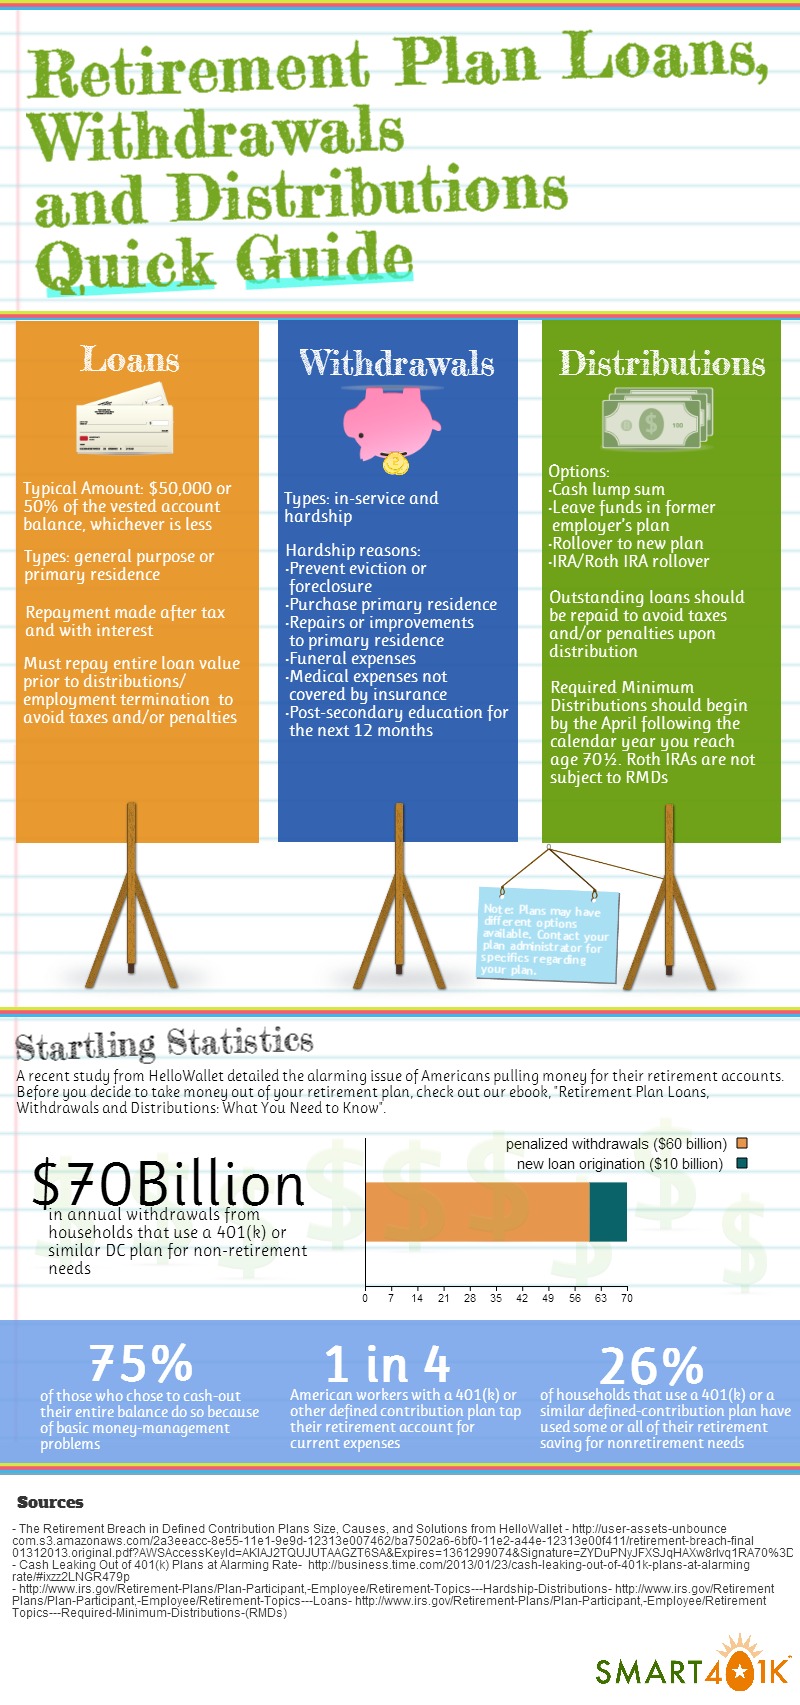 Infographic on Retirement Plan Loans, Withdrawals and Distributions